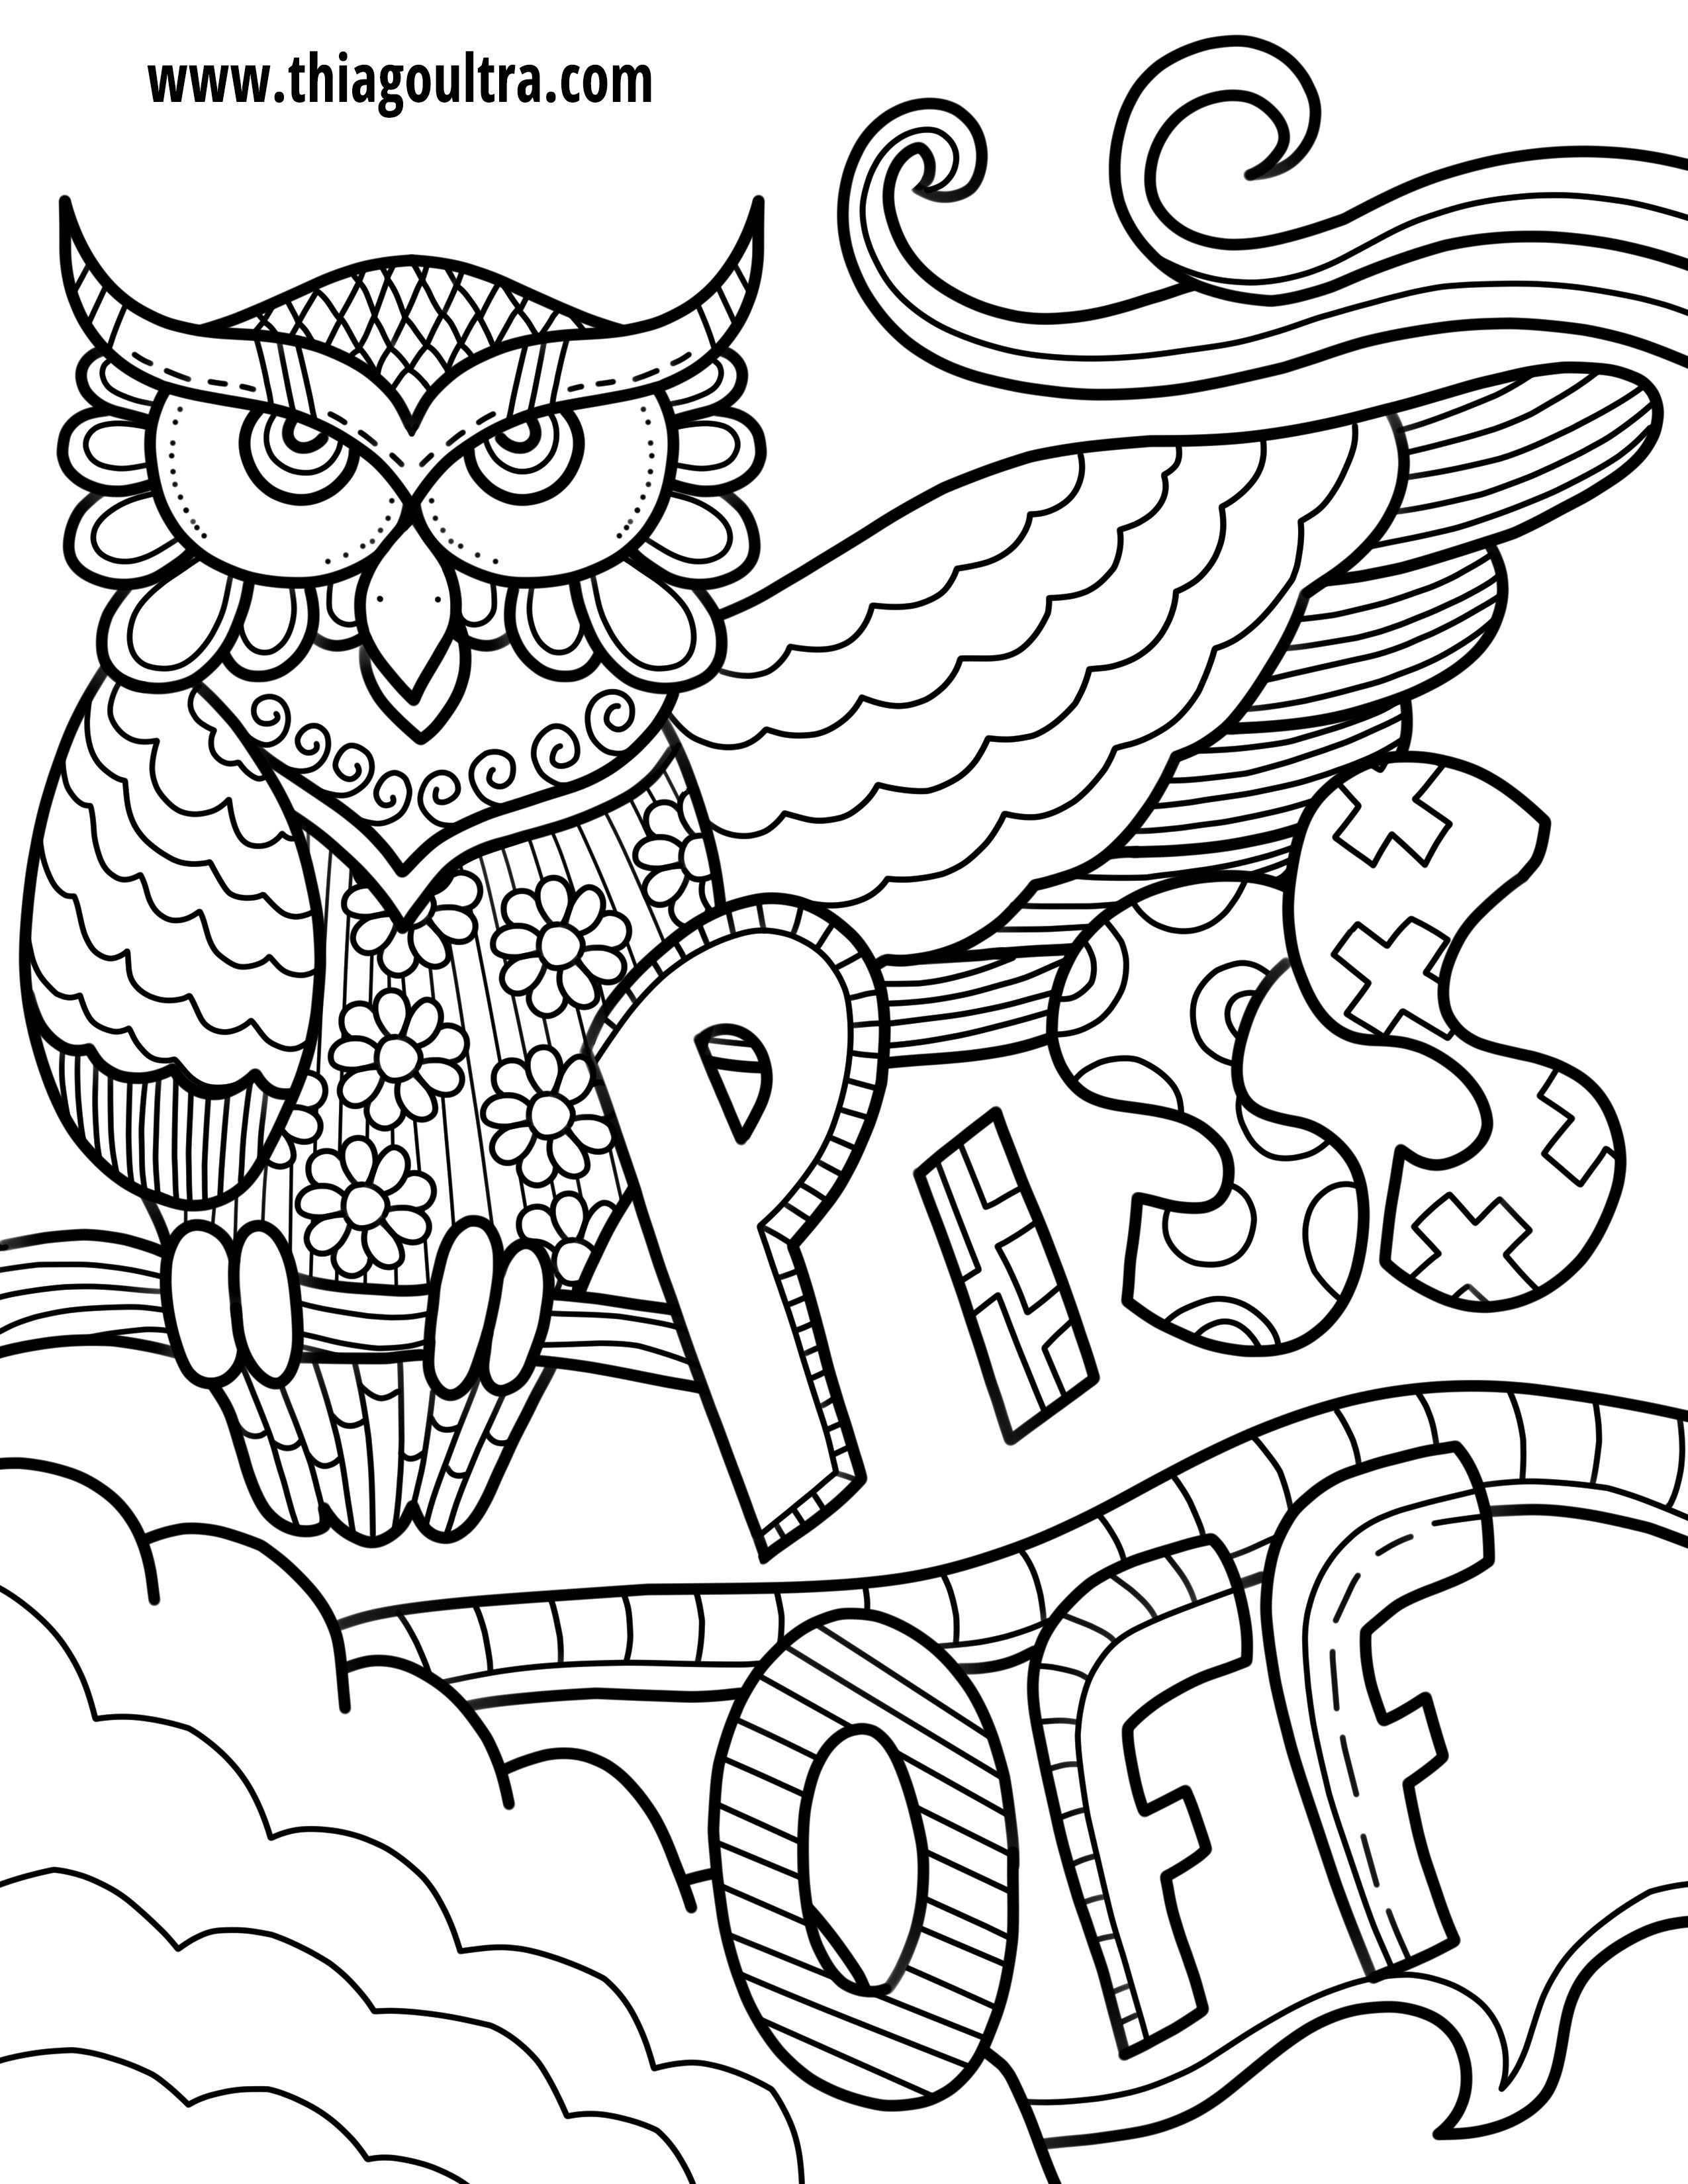 Unique Free Printable Coloring Pages For Adults Only Swear Words - Free Printable Coloring Pages For Adults Swear Words